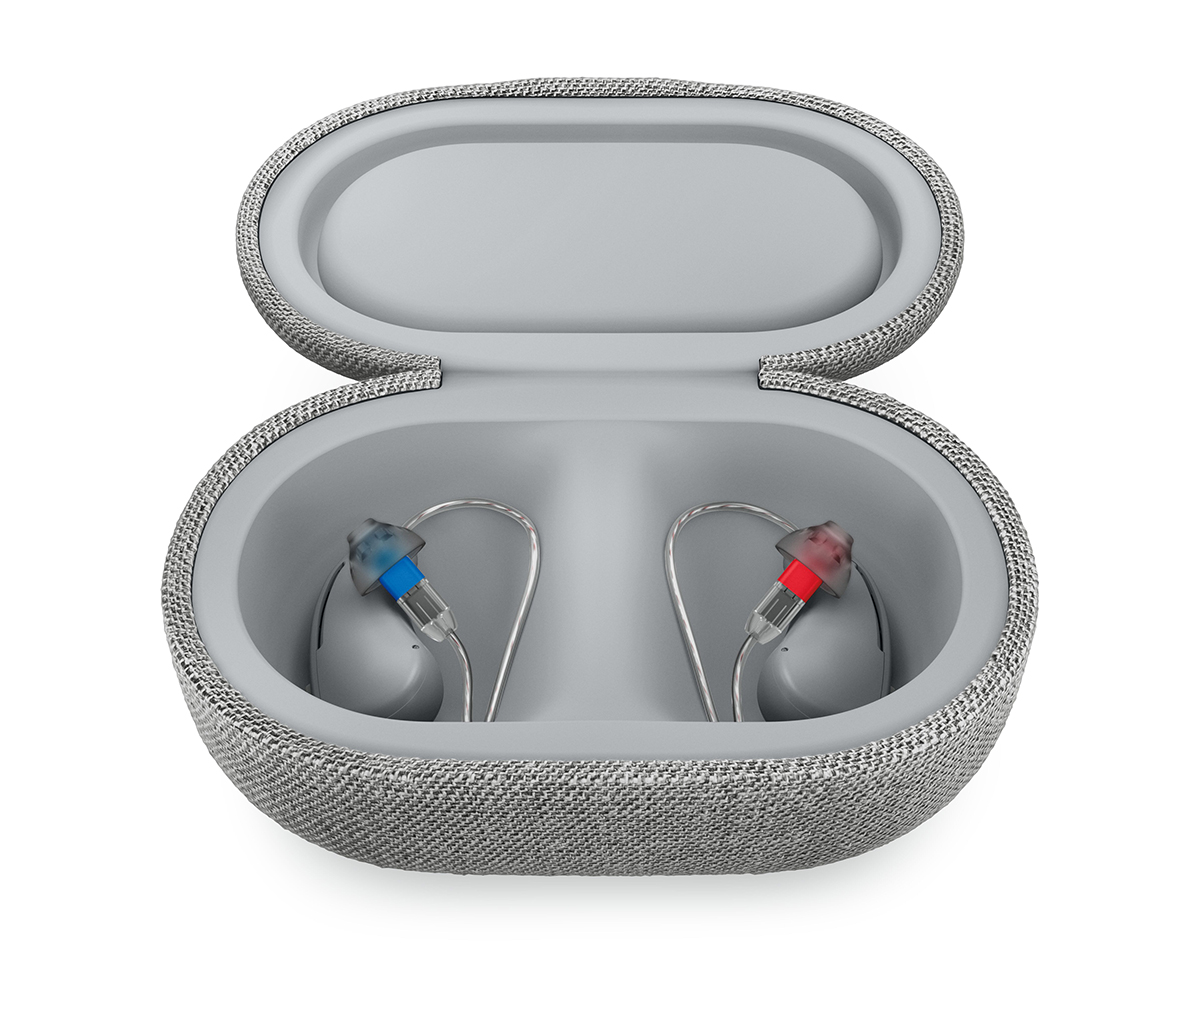 sound control hearing aids